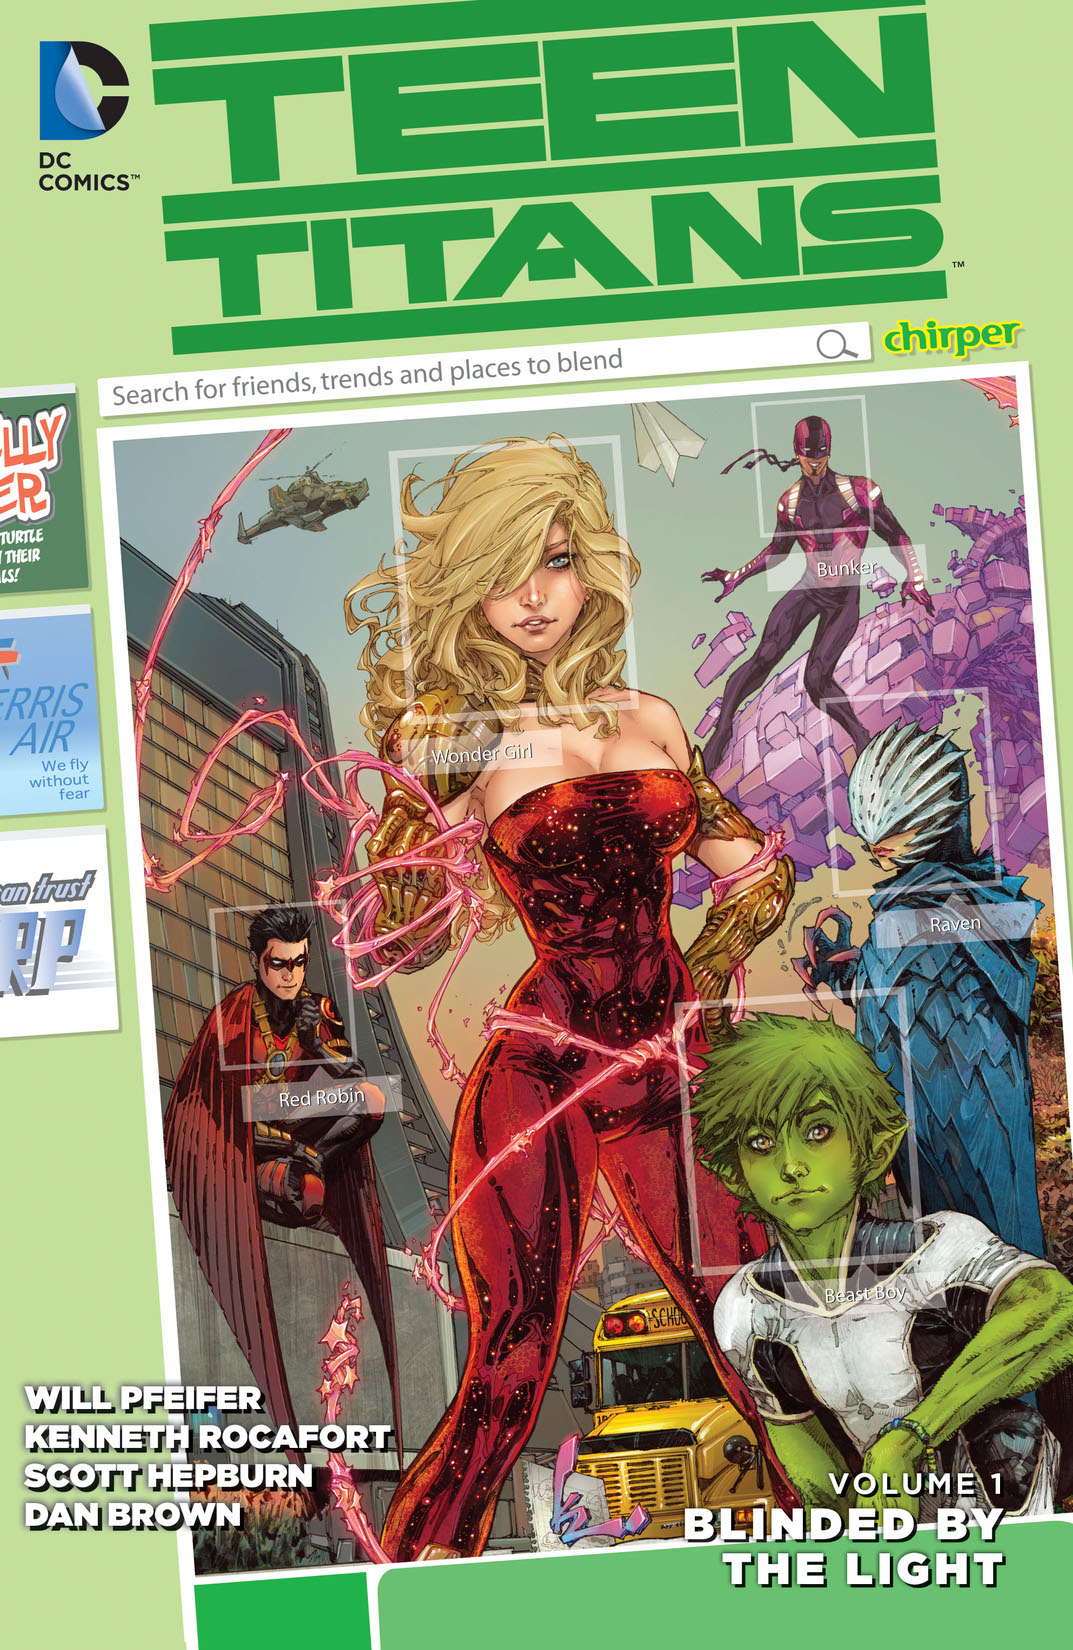 Teen Titans Vol. 1: Blinded by the Light preview images